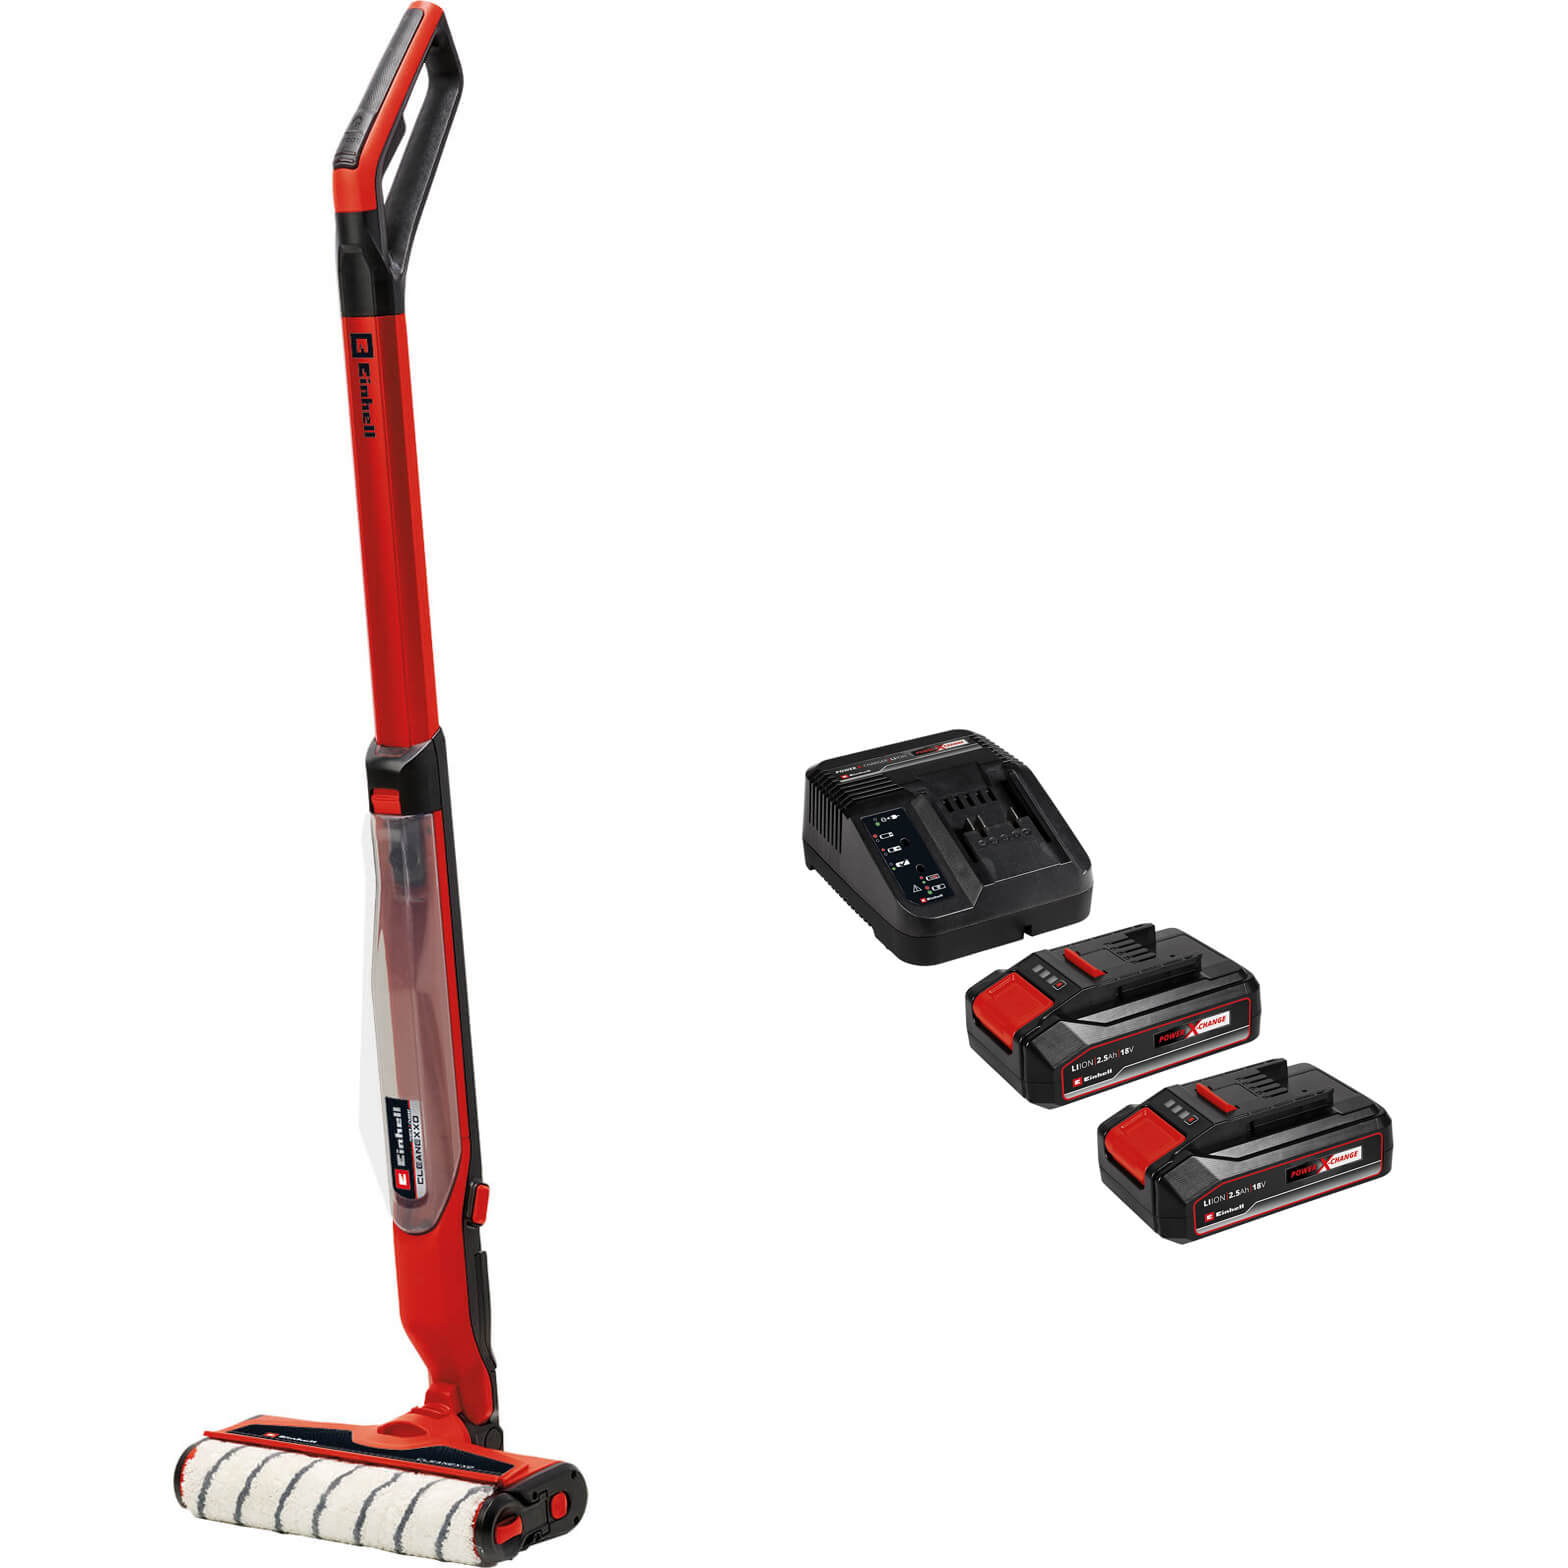 Photos - Other household chemicals Einhell CLEANEXXO 18v Cordless Hard Floor Cleaner 2 x 2.5ah Li-ion Charger 